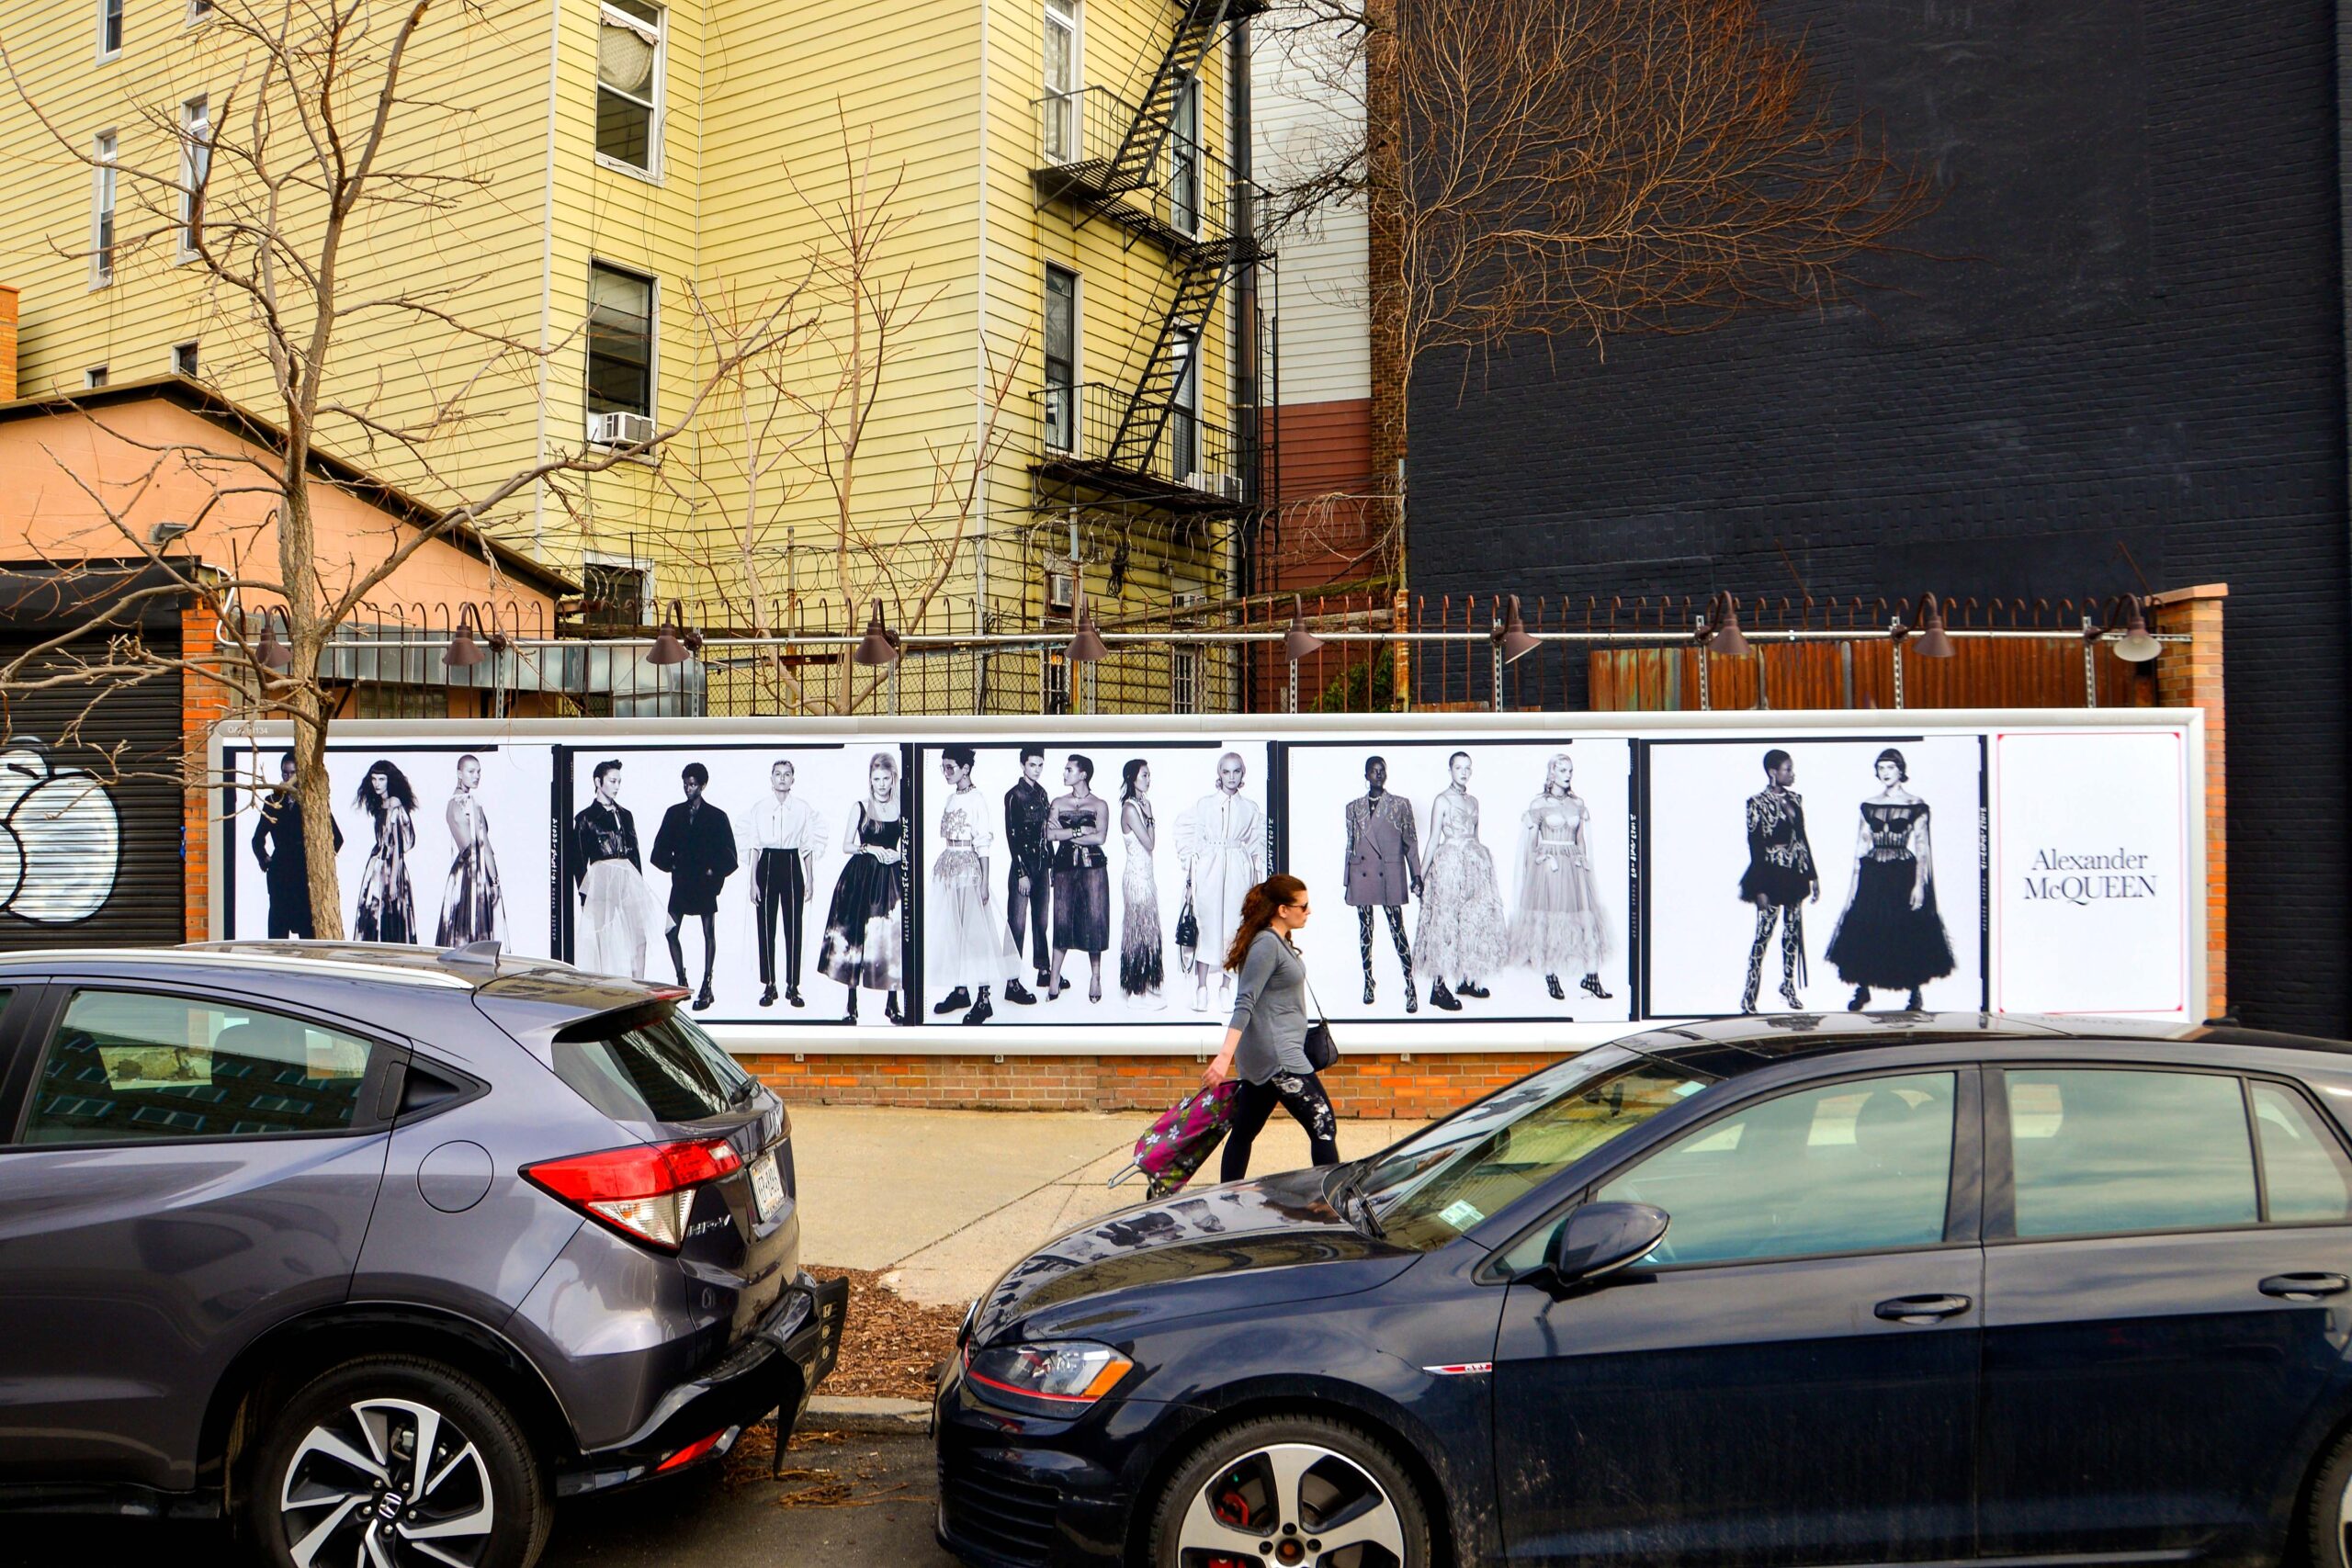 Alexander McQueen NYC Wallscapes Calyer St & Banker St OOH Advertising Alchemy Media